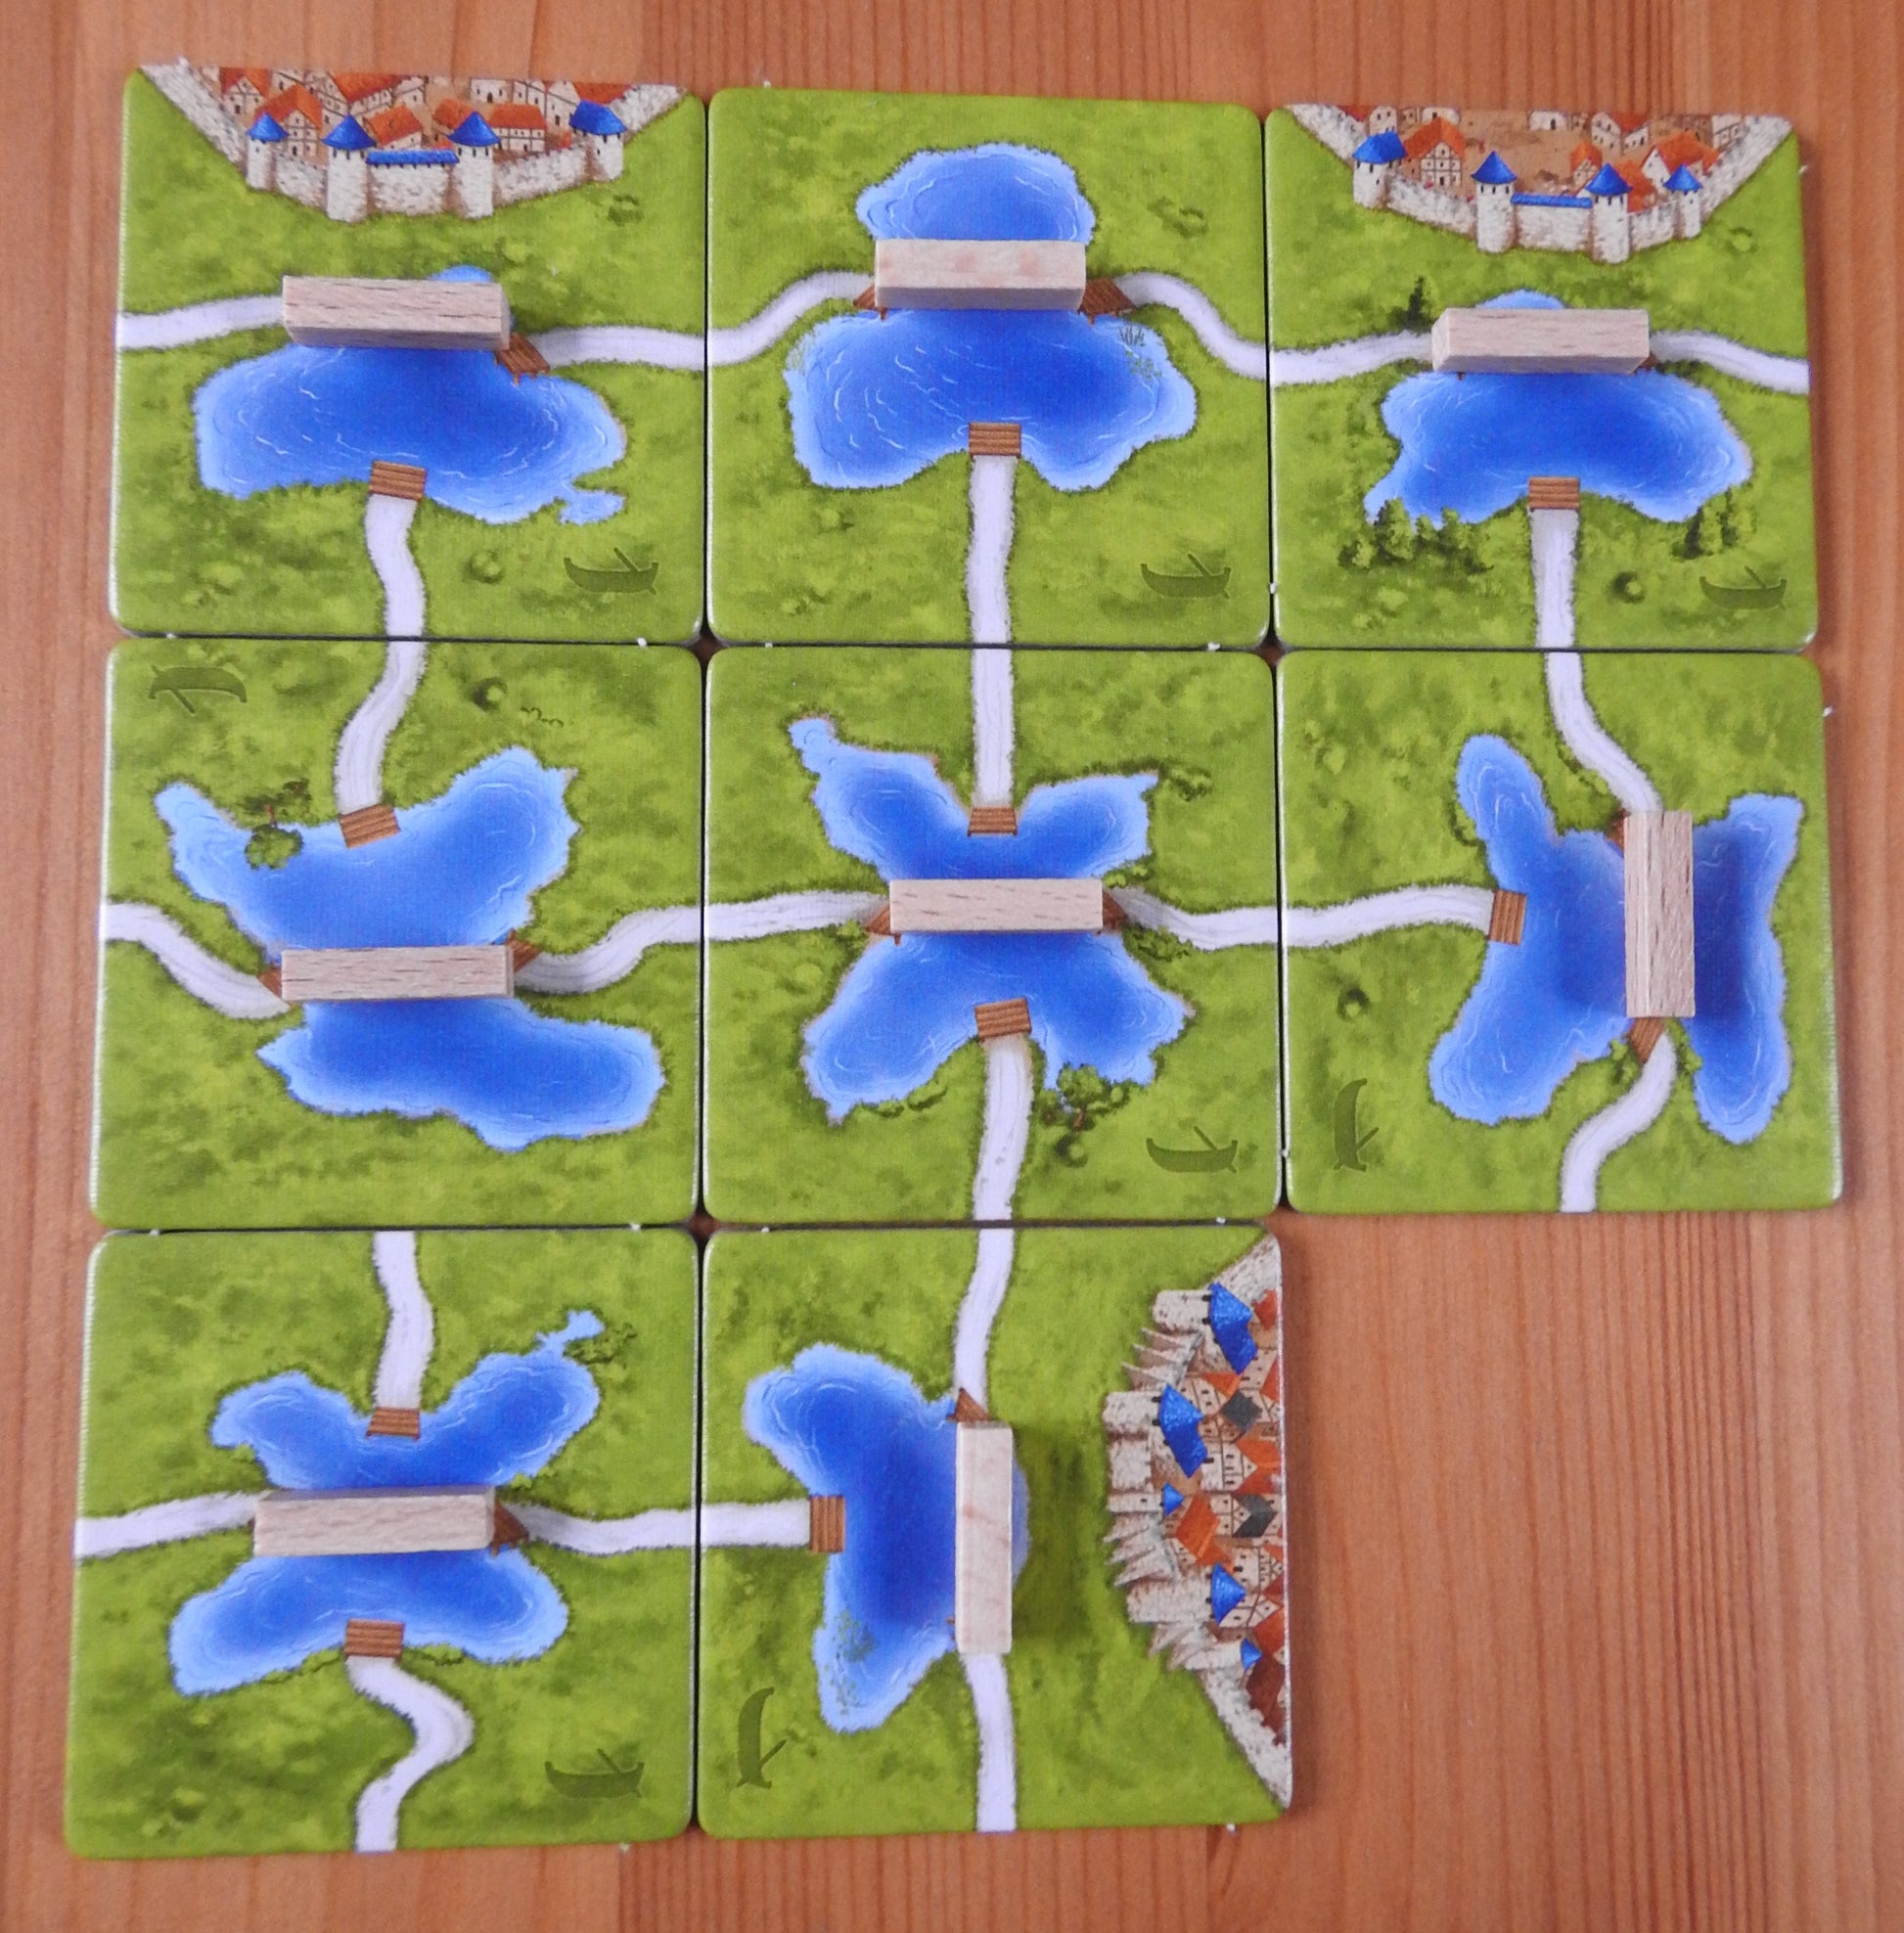 Another view from above of all 8 tiles and 8 wooden ferry pieces in this Carcassonne Ferries expansion.